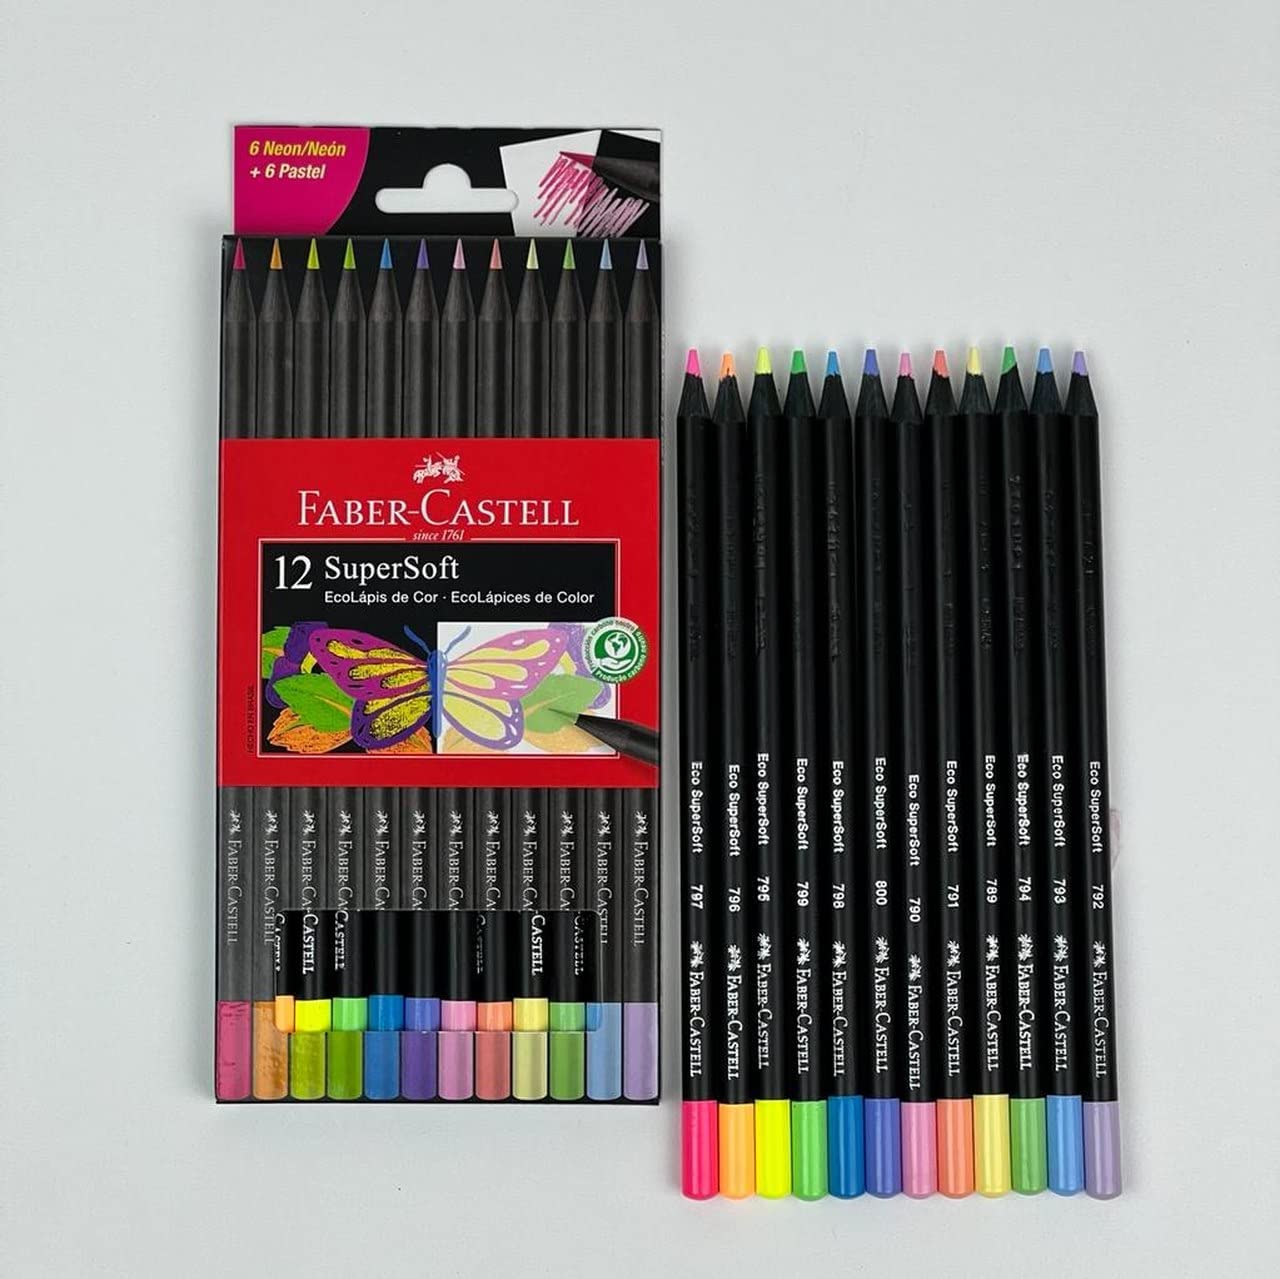 Lápices Faber-Castell SuperSoft 12 Colores Metálico